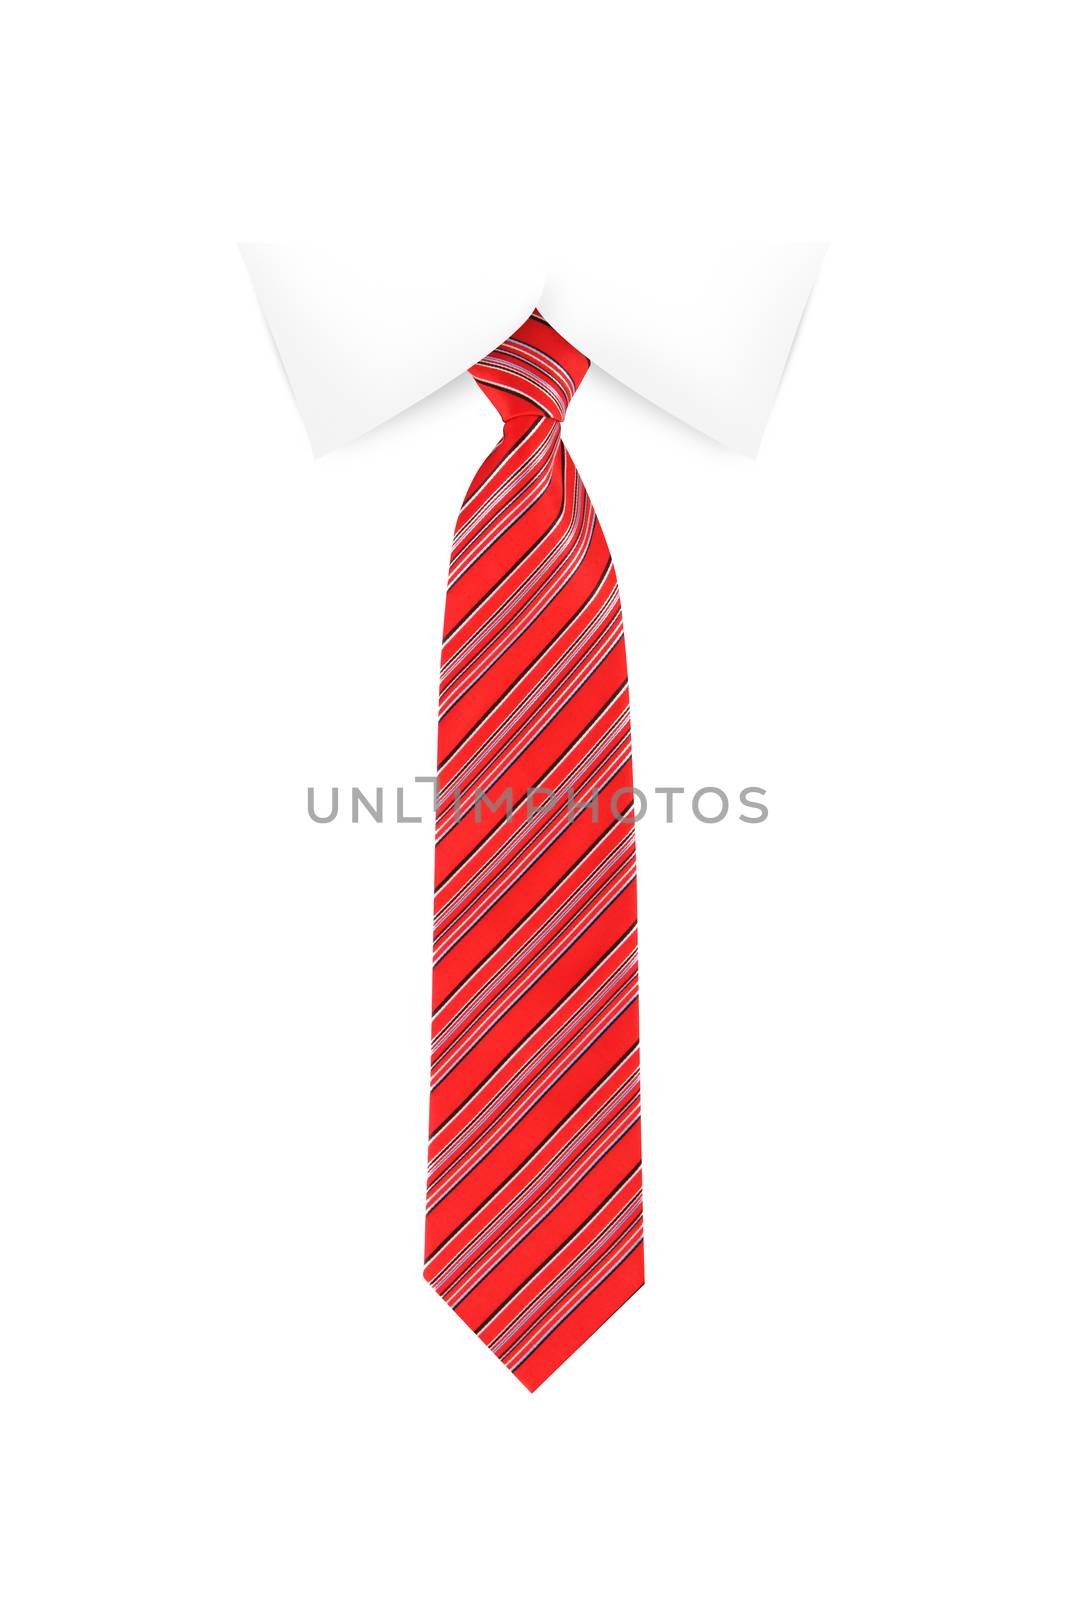 Close up front view of tied up red striped necktie on a shirt collar, isolated on white background.